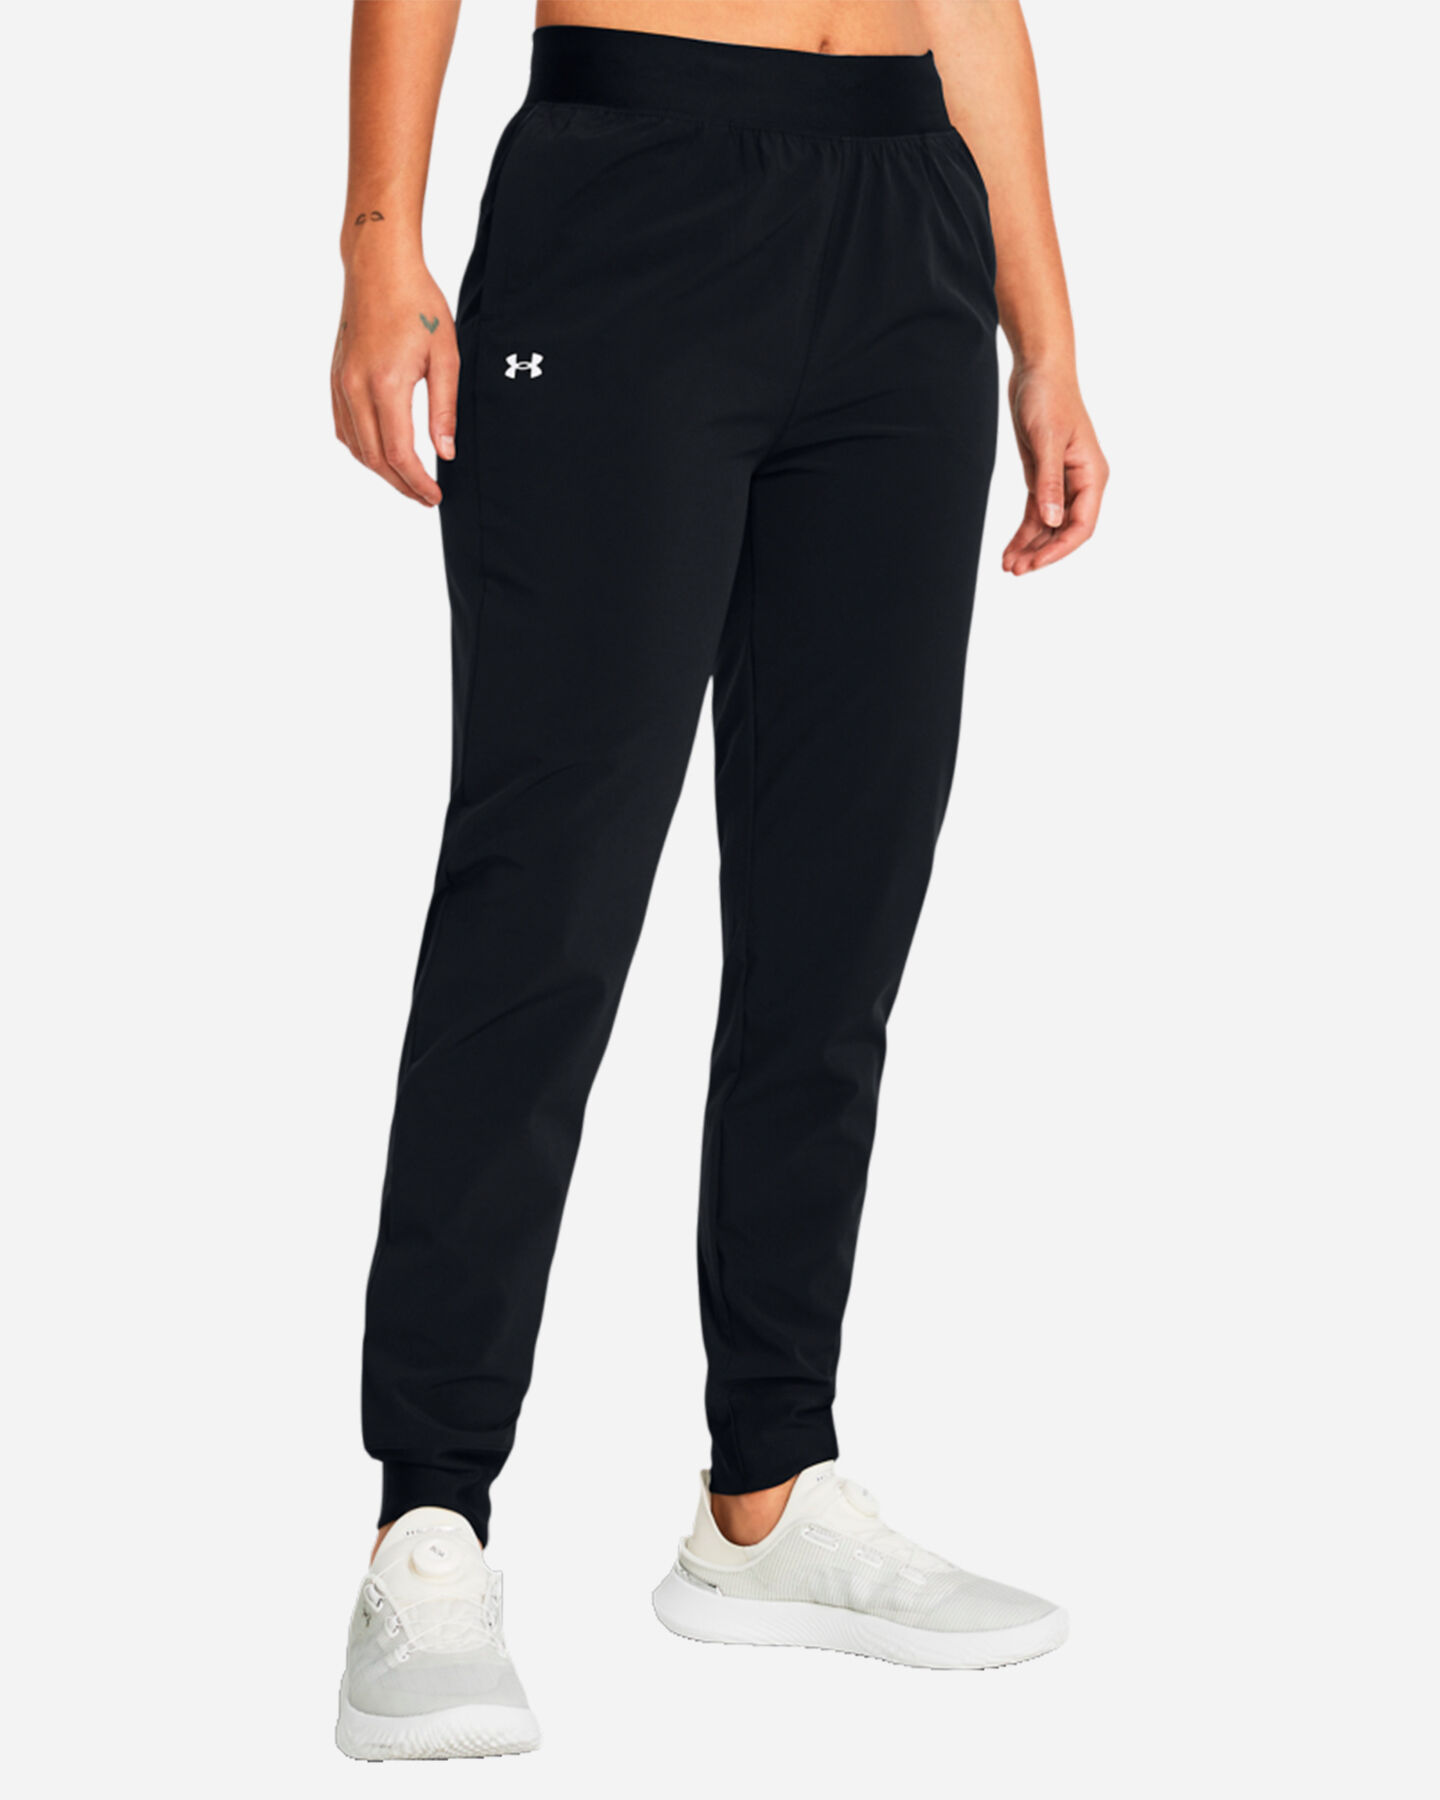  Pantalone UNDER ARMOUR WOVEN W S5641550|0001|XS scatto 2